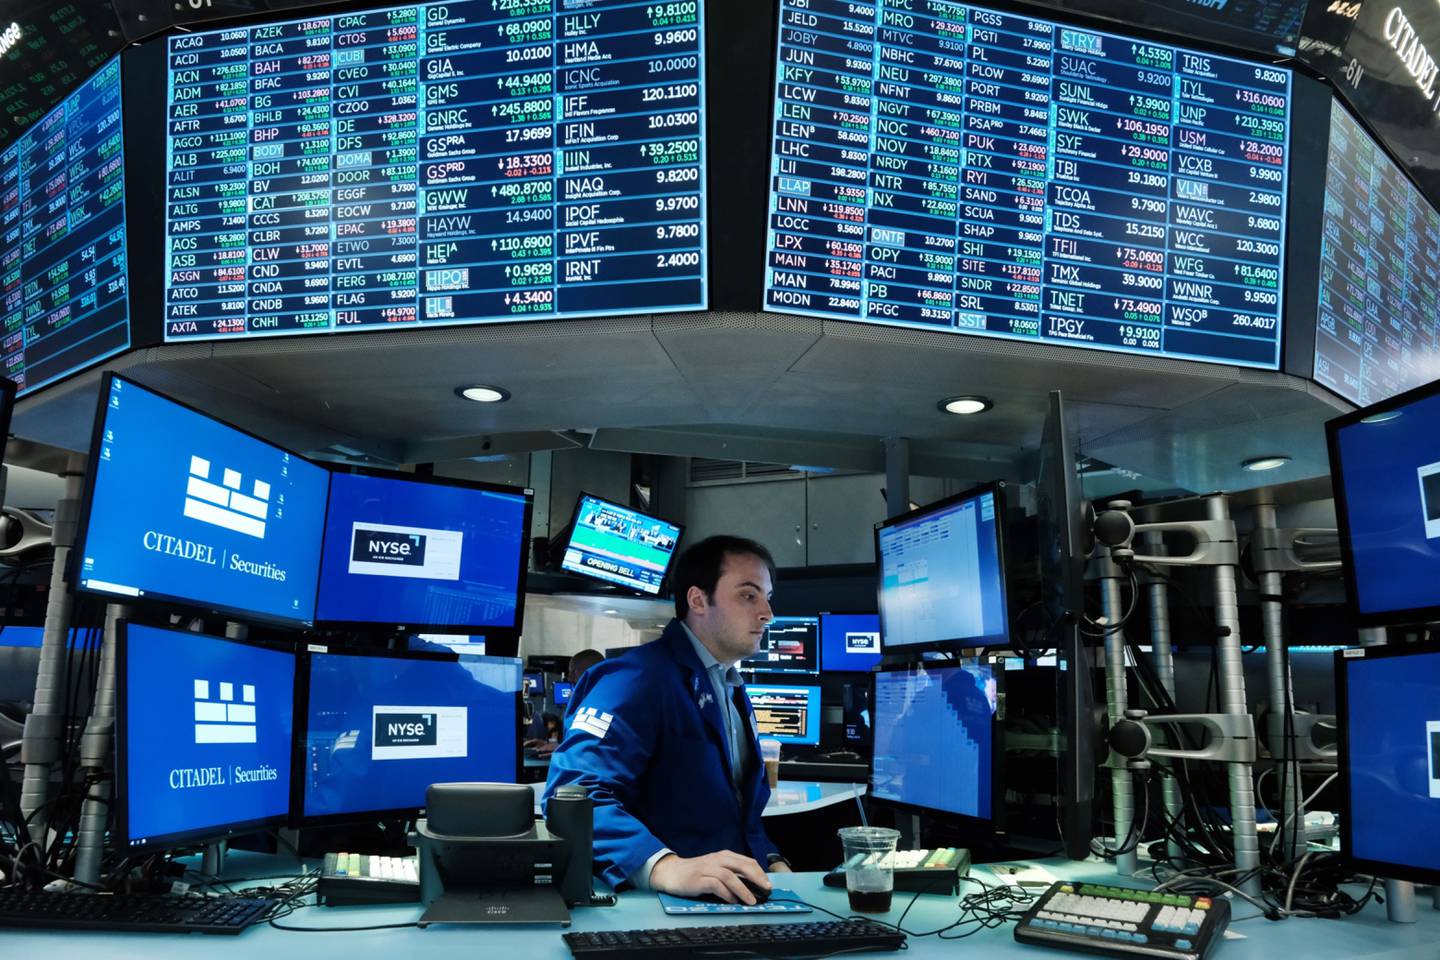 Traders work on the floor of the New York Stock Exchange (NYSE). Photo by Spencer Platt/Getty Images